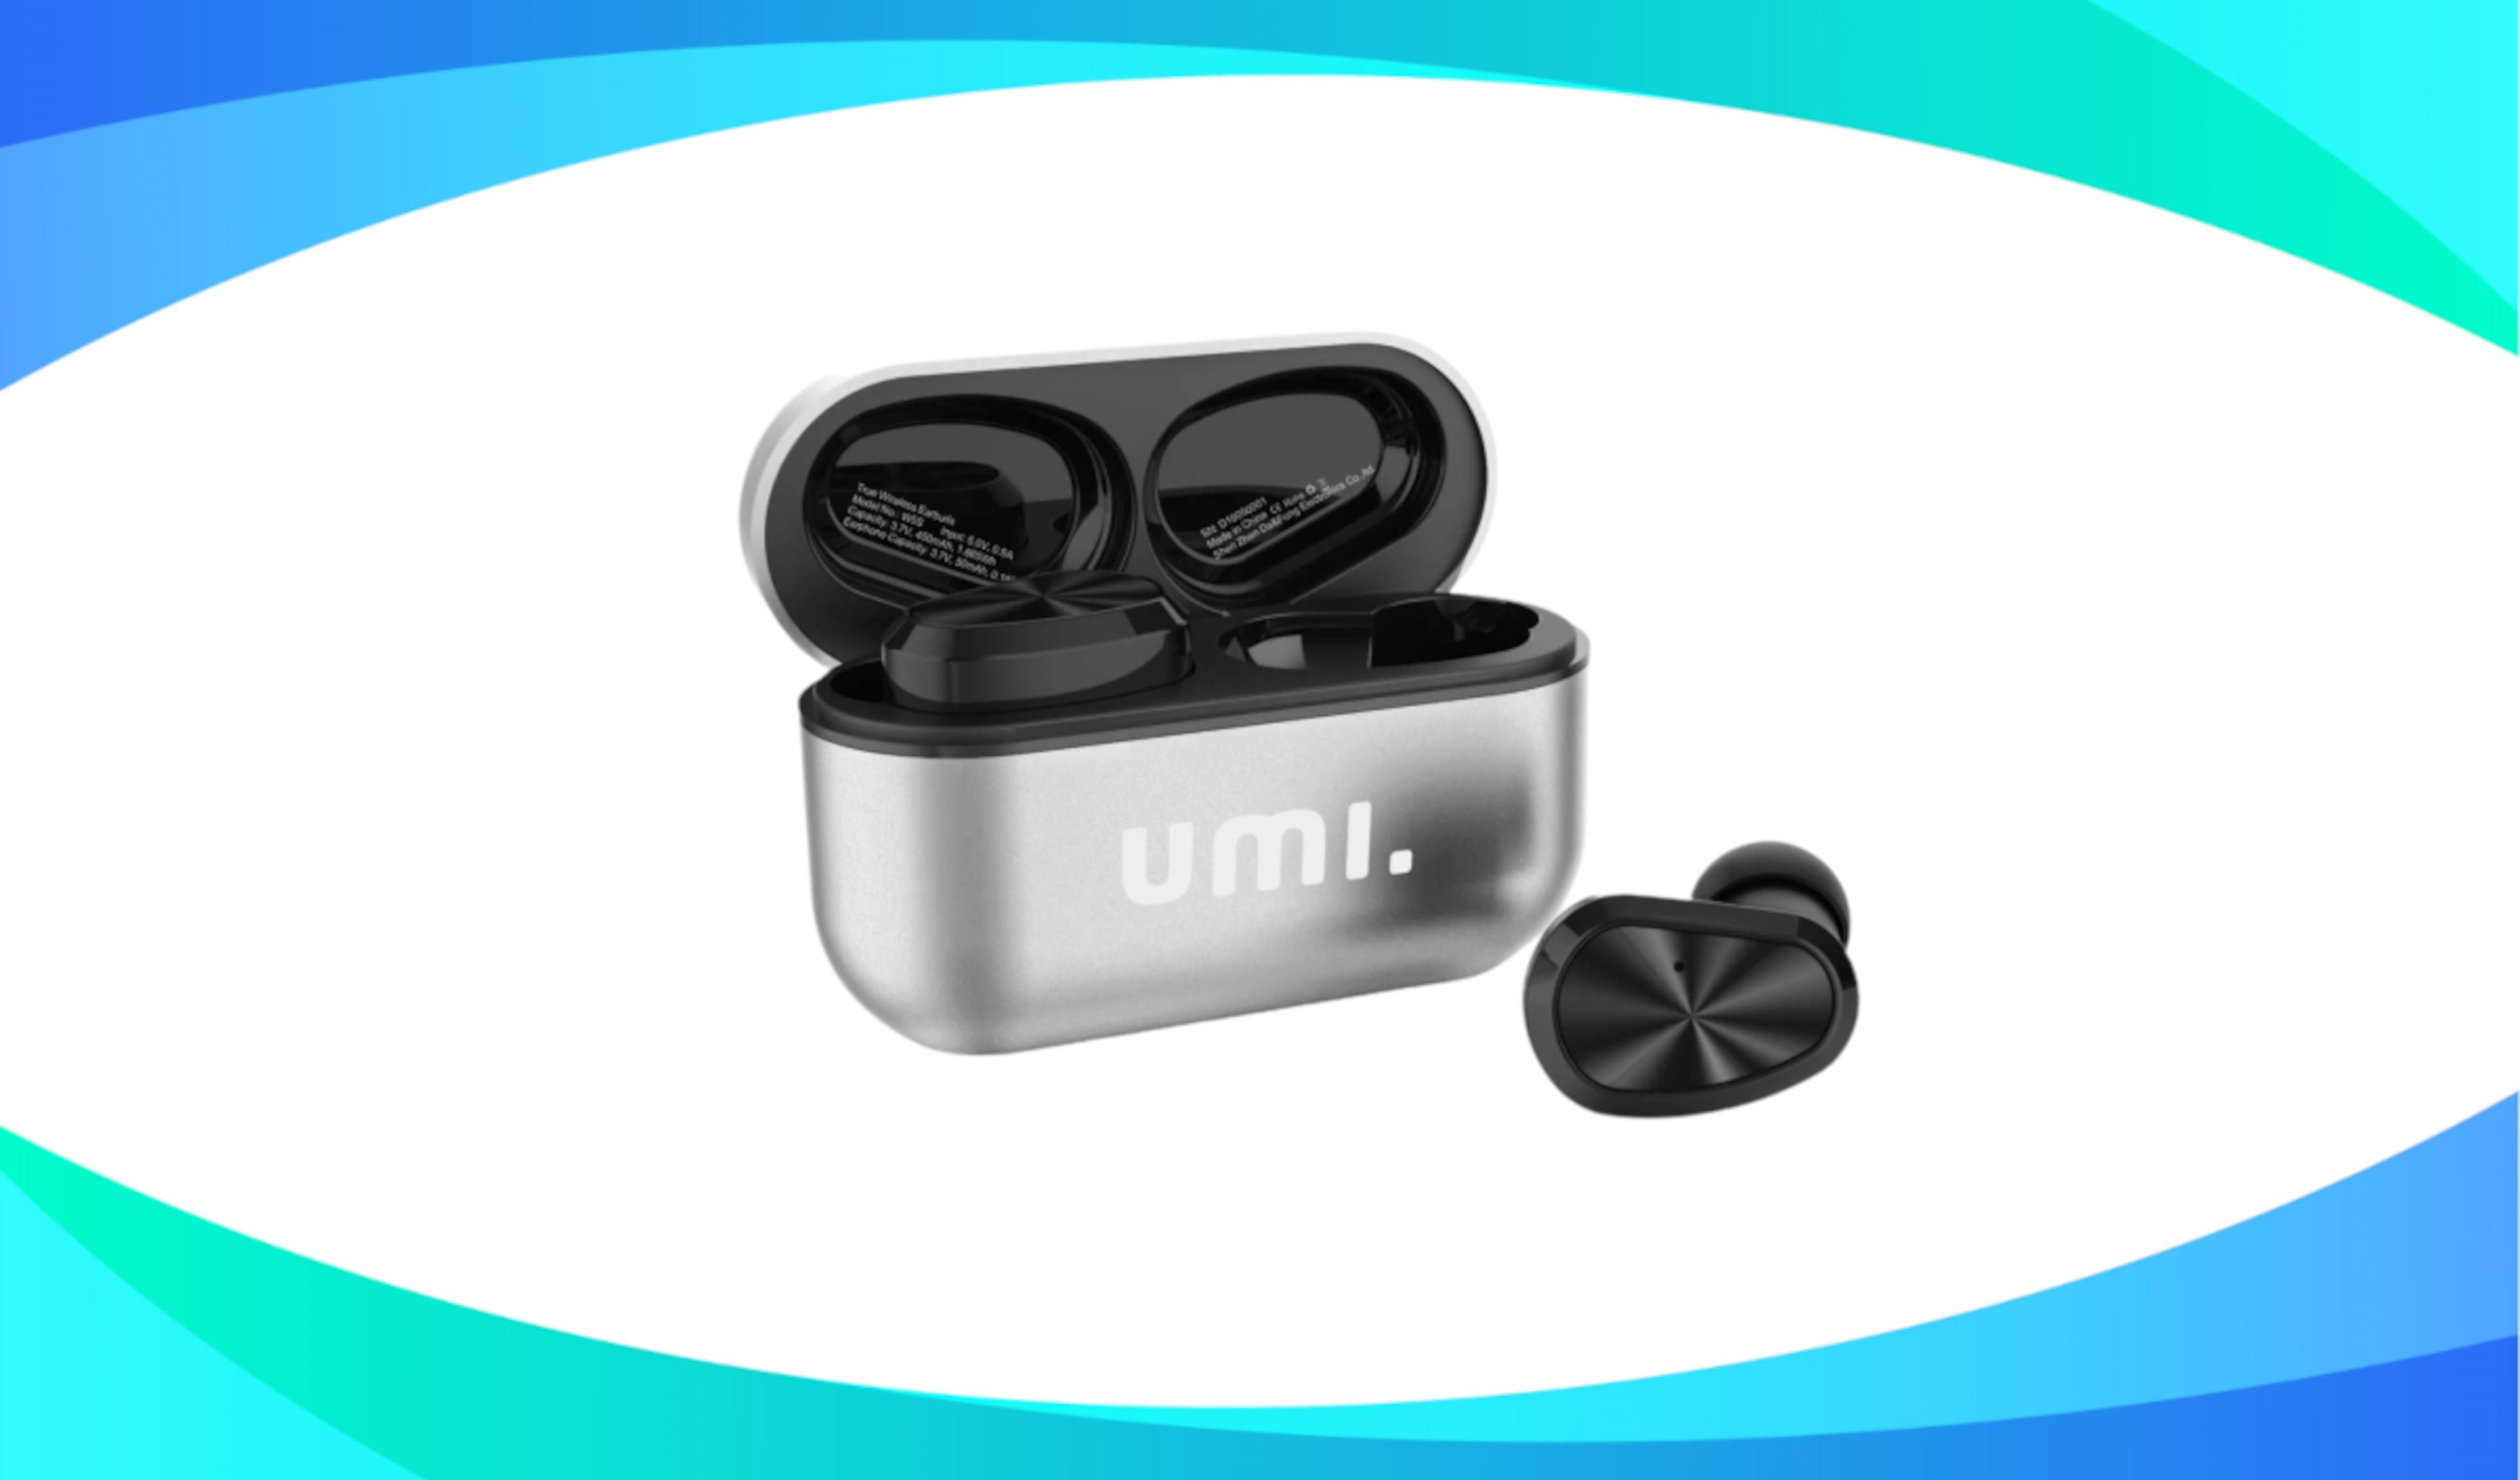 Umi. by Amazon auriculares